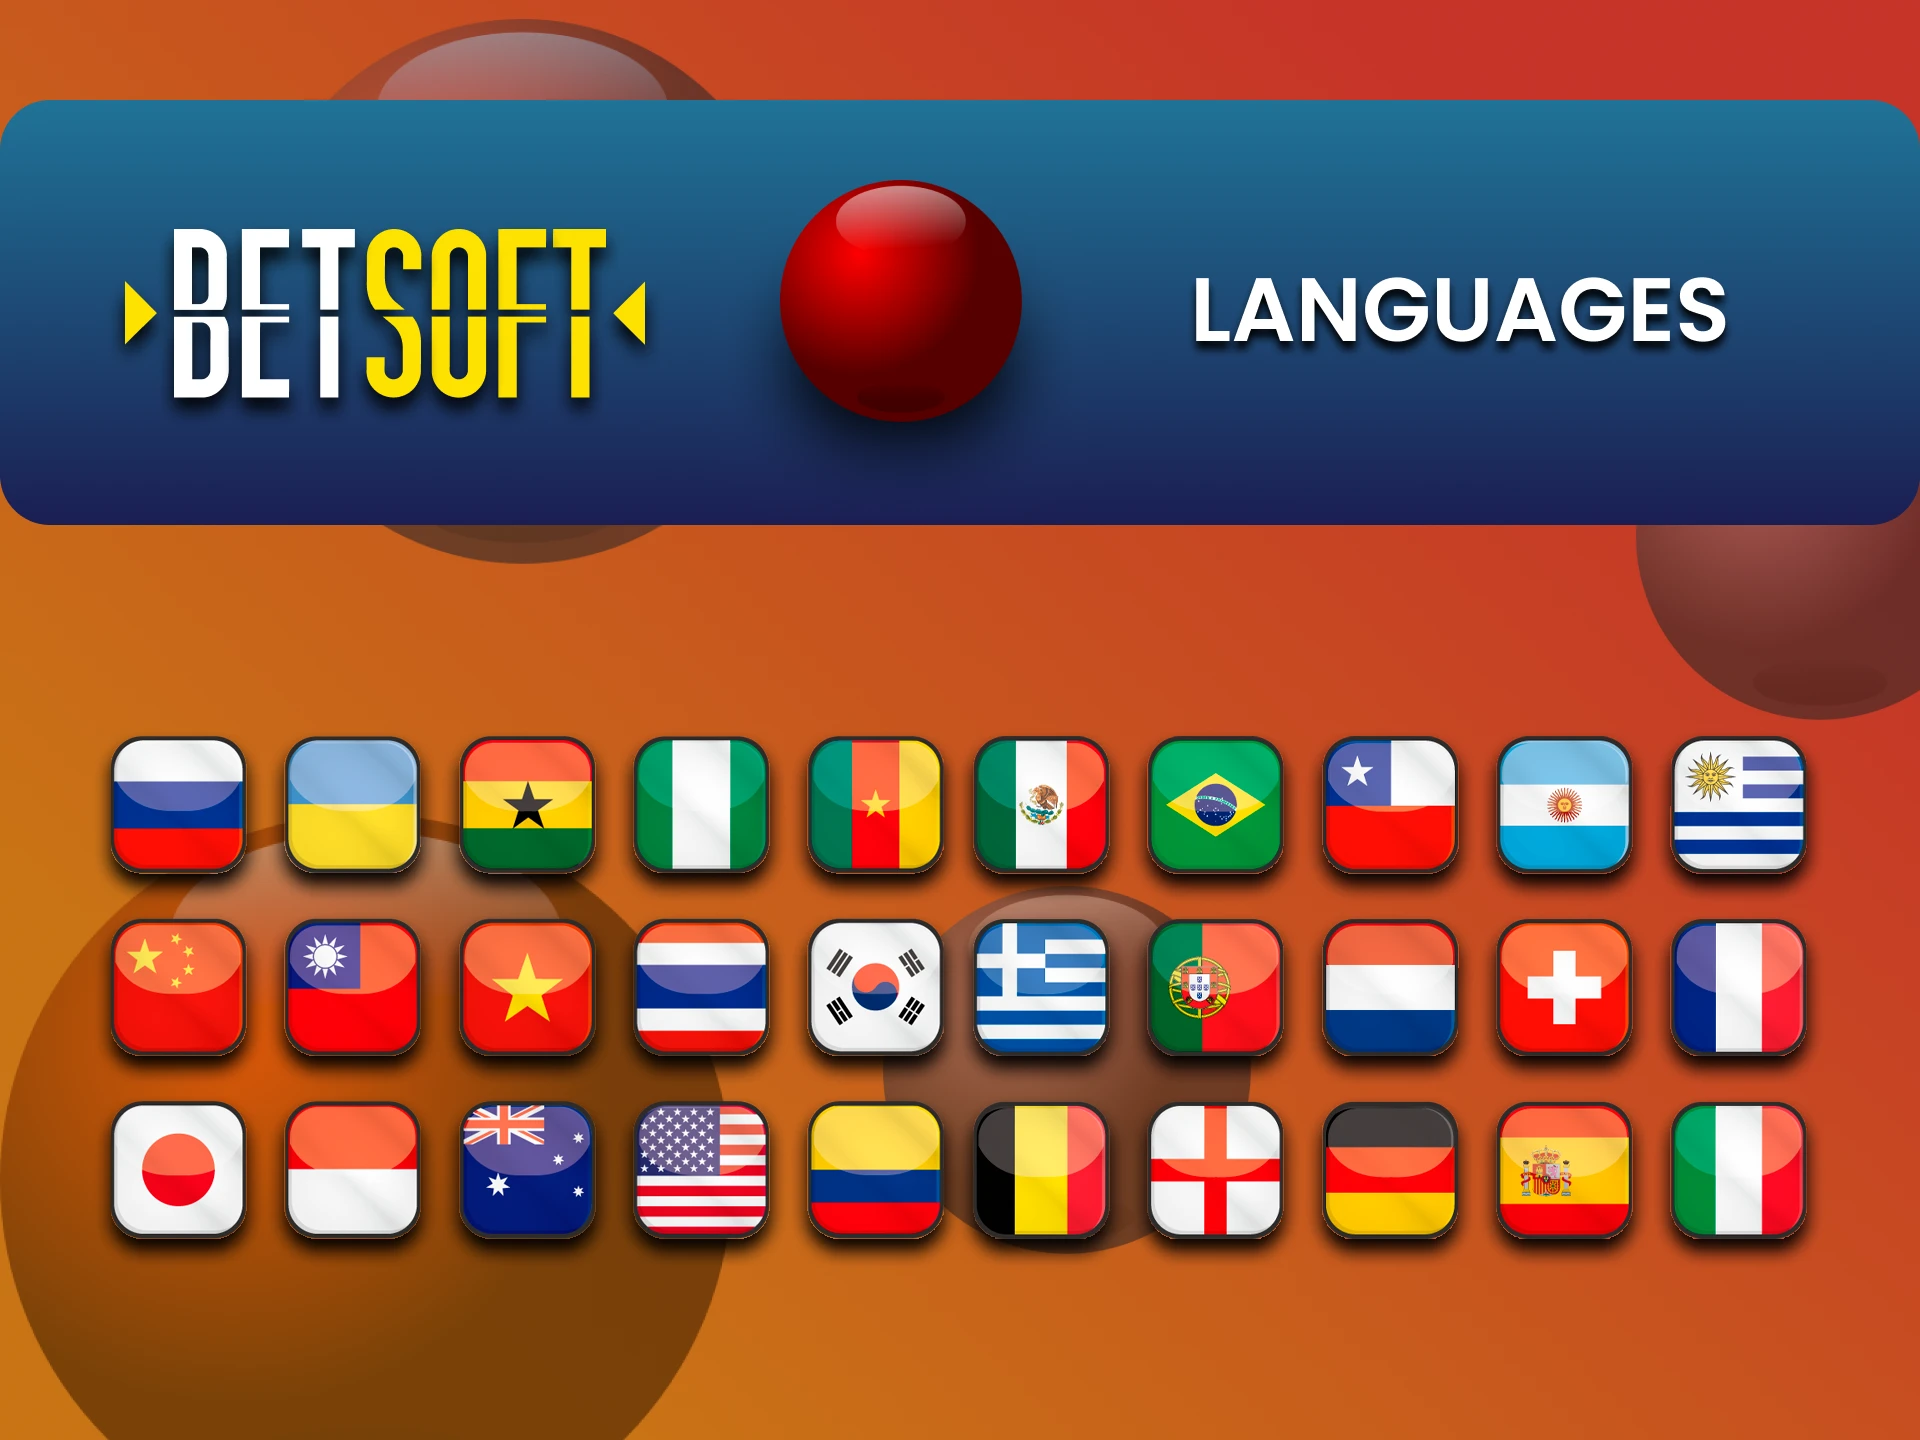 We will tell you in what languages ​​games from the Betsoft provider are available.